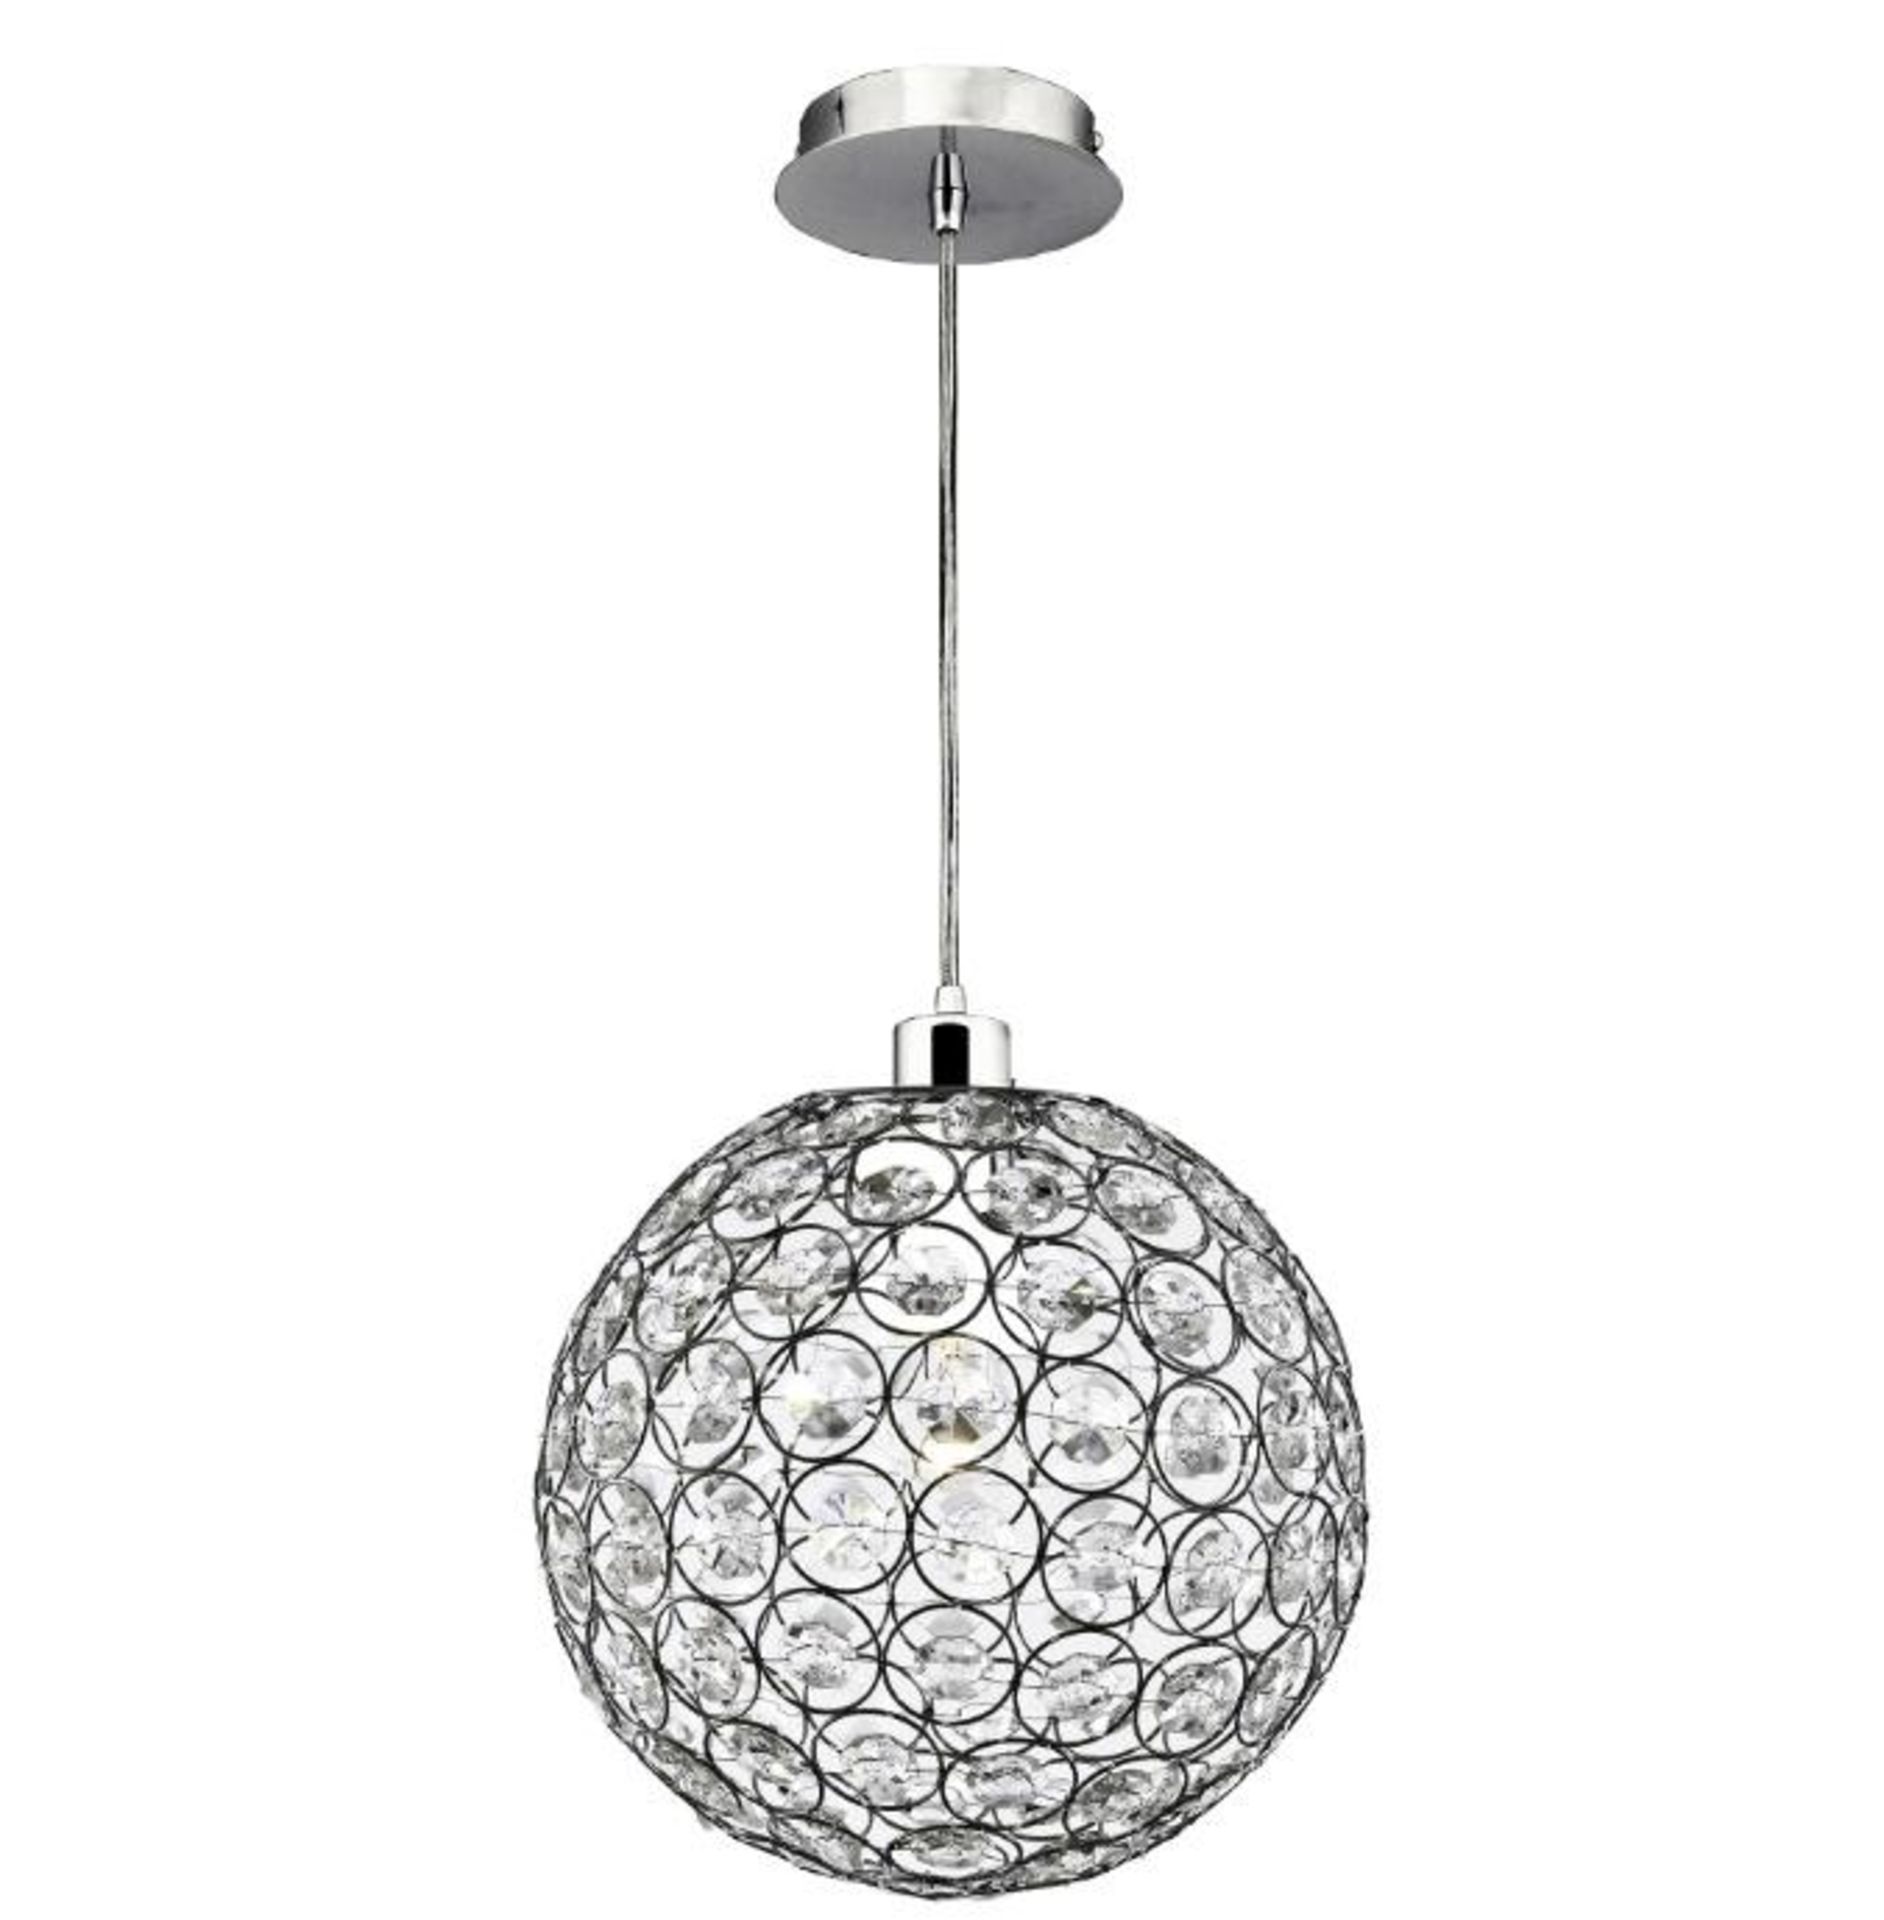 1 x Bellis II Chrome Pendant With Clear Acrylic Buttons - Ex Display Stock - CL323 - Ref: 4145CL/PAL